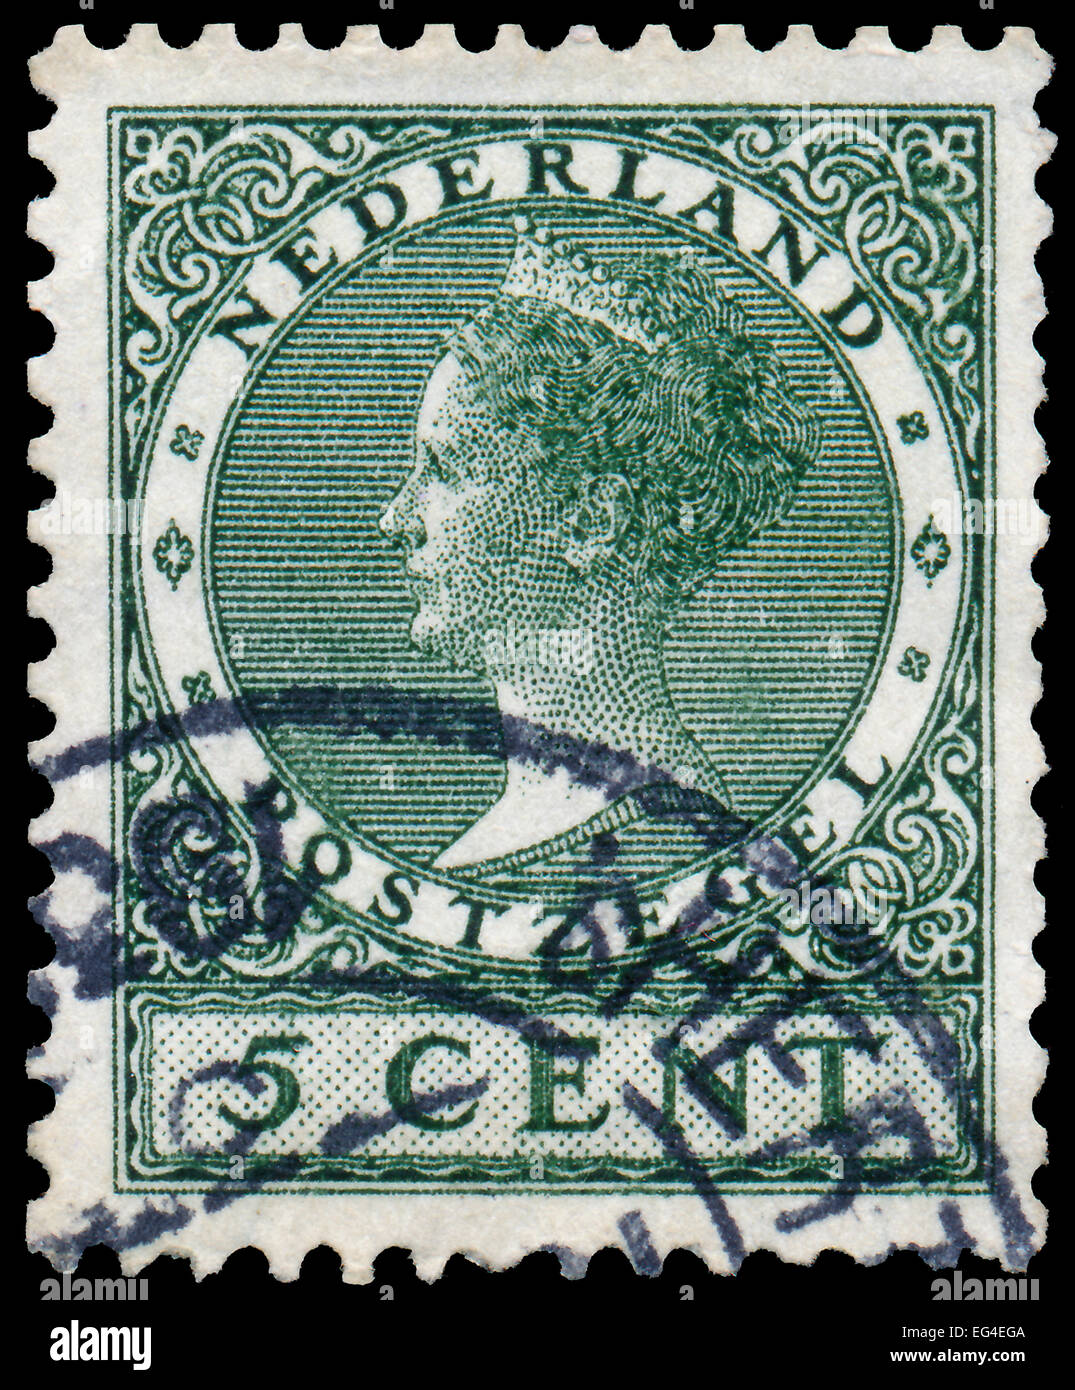 NETHERLANDS - CIRCA 1924: A stamp printed in the Netherlands shows Queen Wilhelmina, circa 1924. Stock Photo